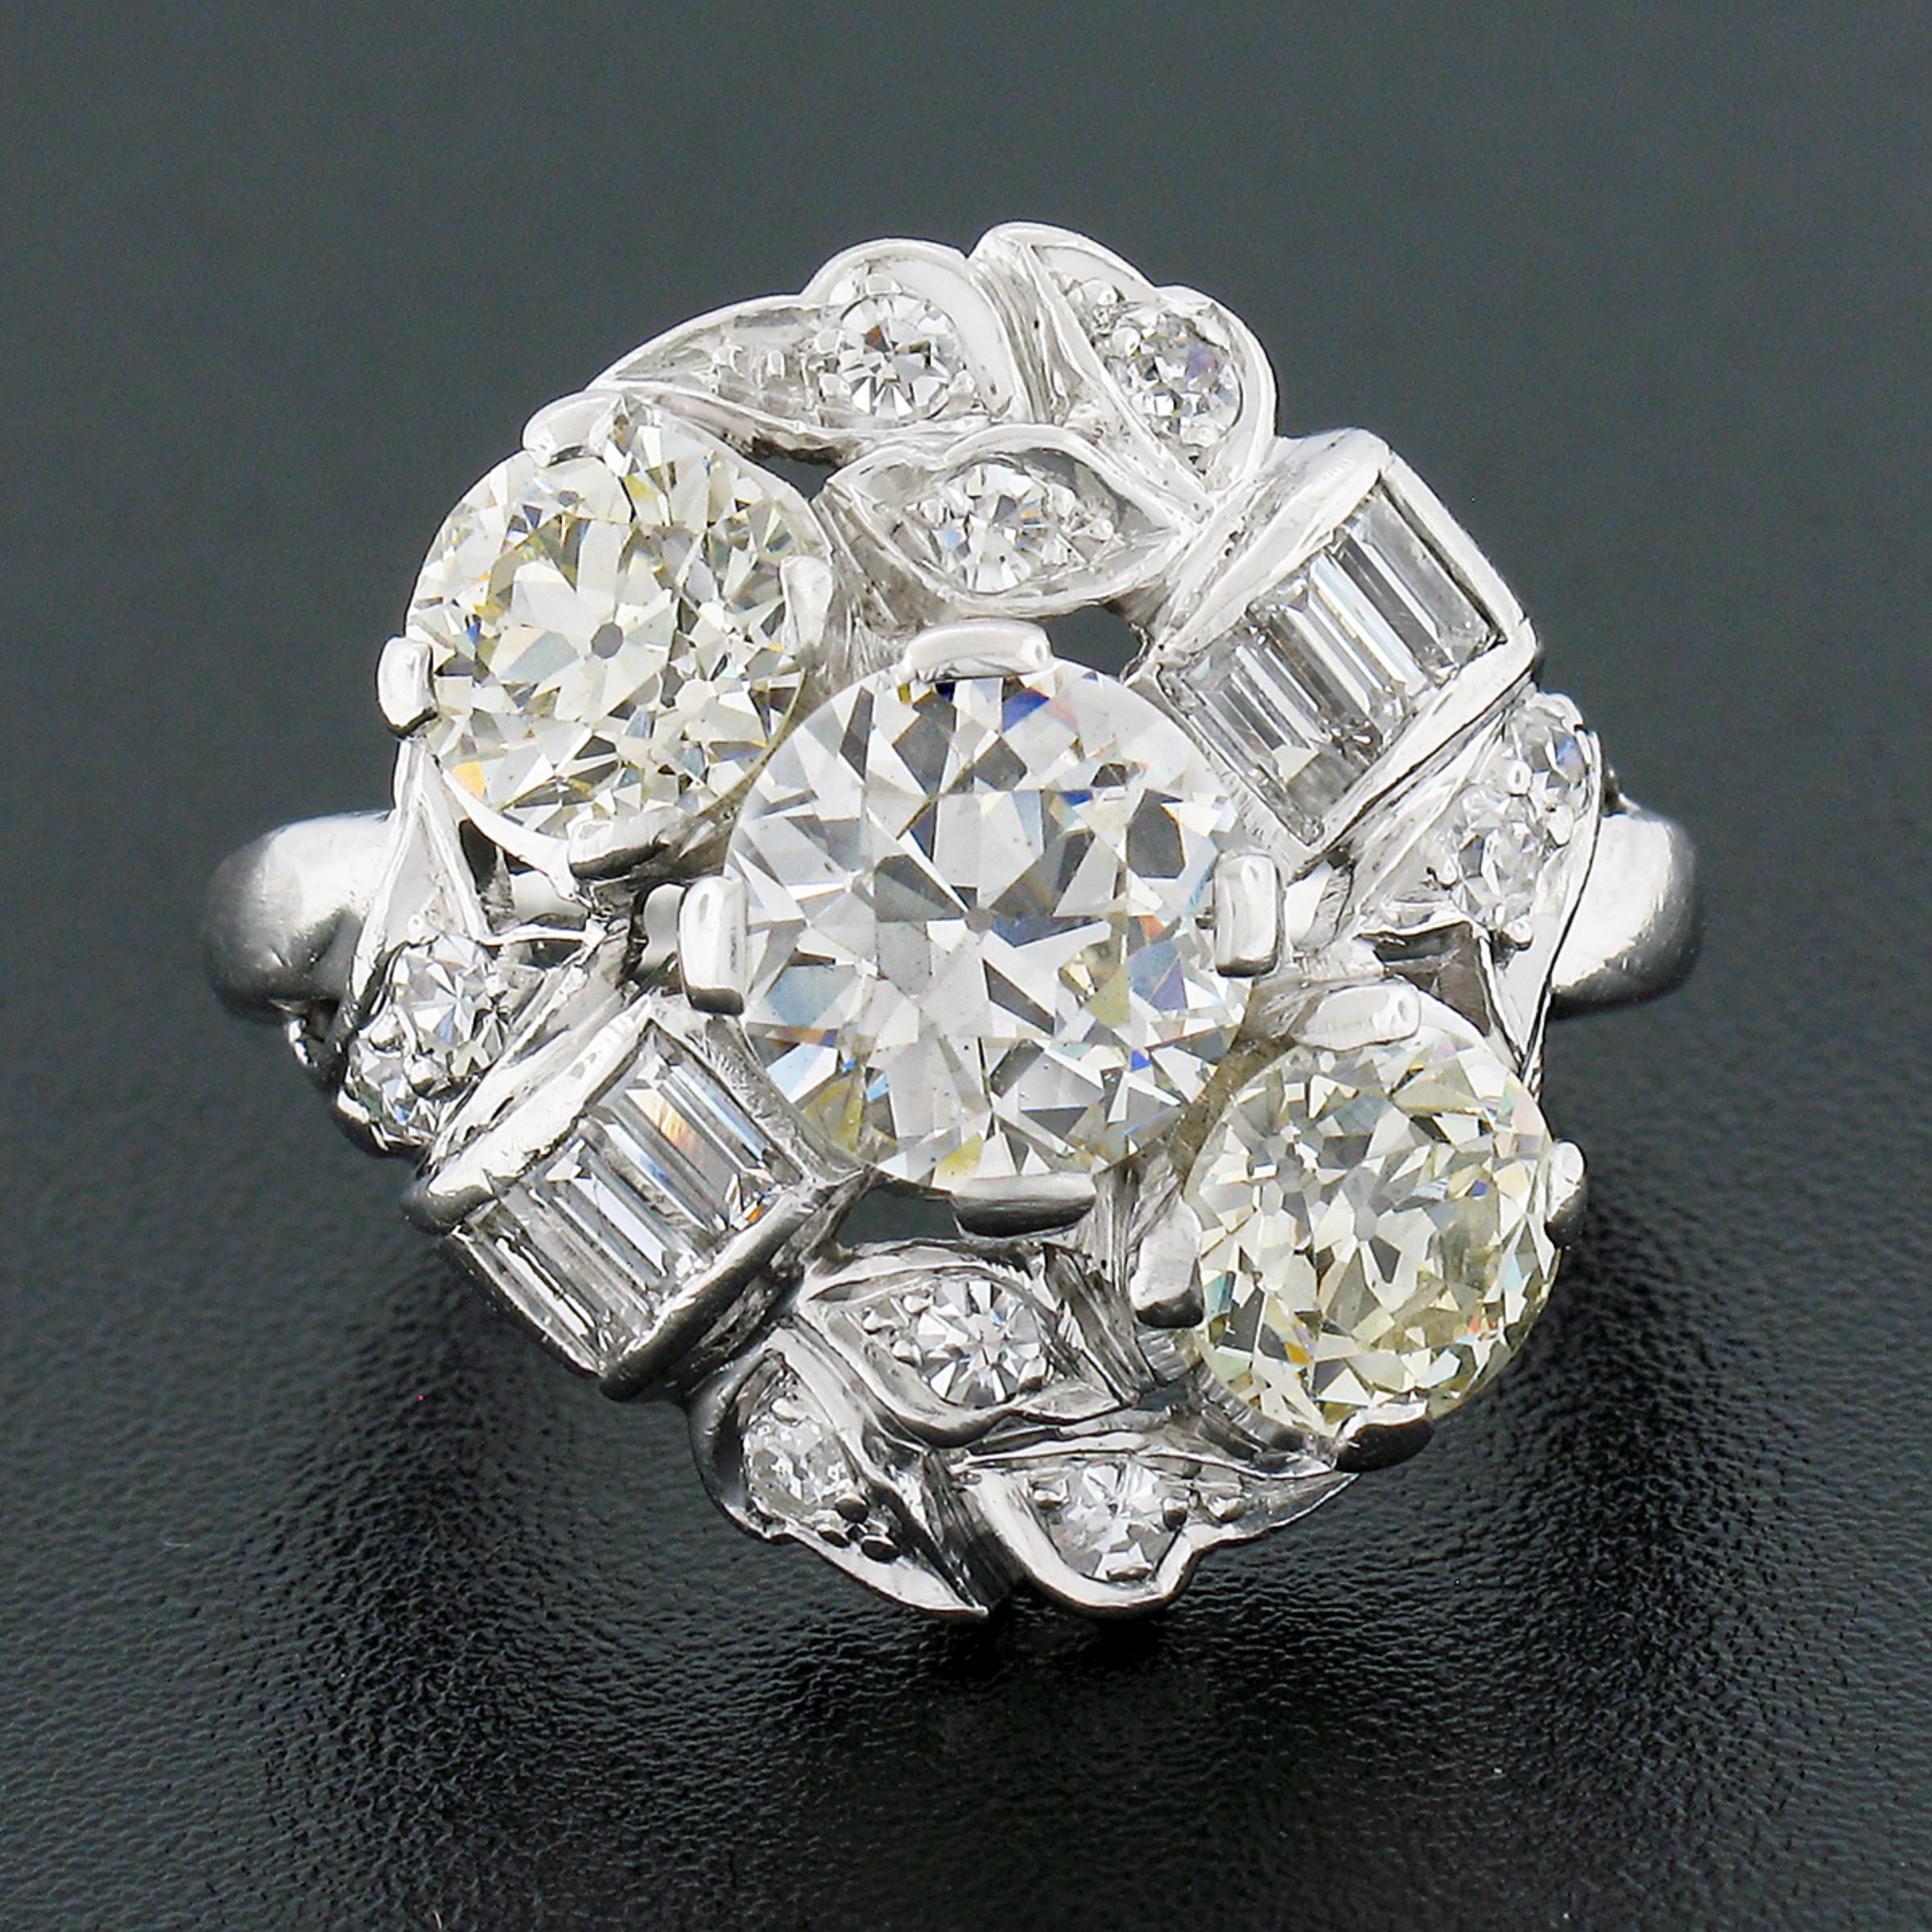 Here we have an absolutely magnificent, antique, diamond engagement or cocktail ring that was crafted from solid platinum during the art deco period. It features 3 old European cut diamonds, with each showing a nice large size, that are diagonally